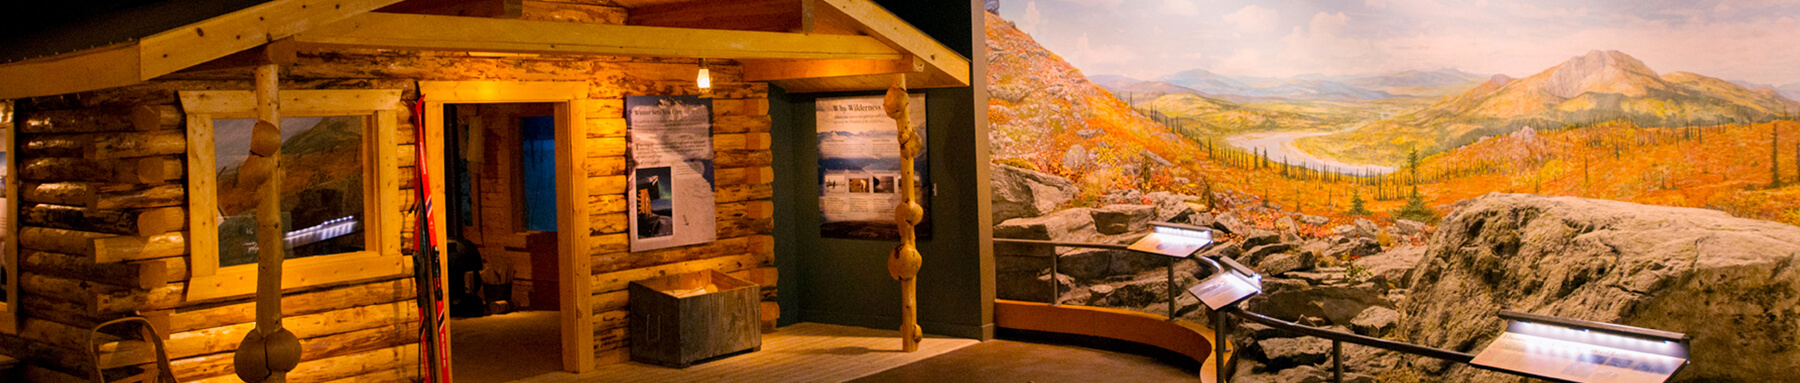 Exhibit at Morris Thompson Cultural and Visitors Center.